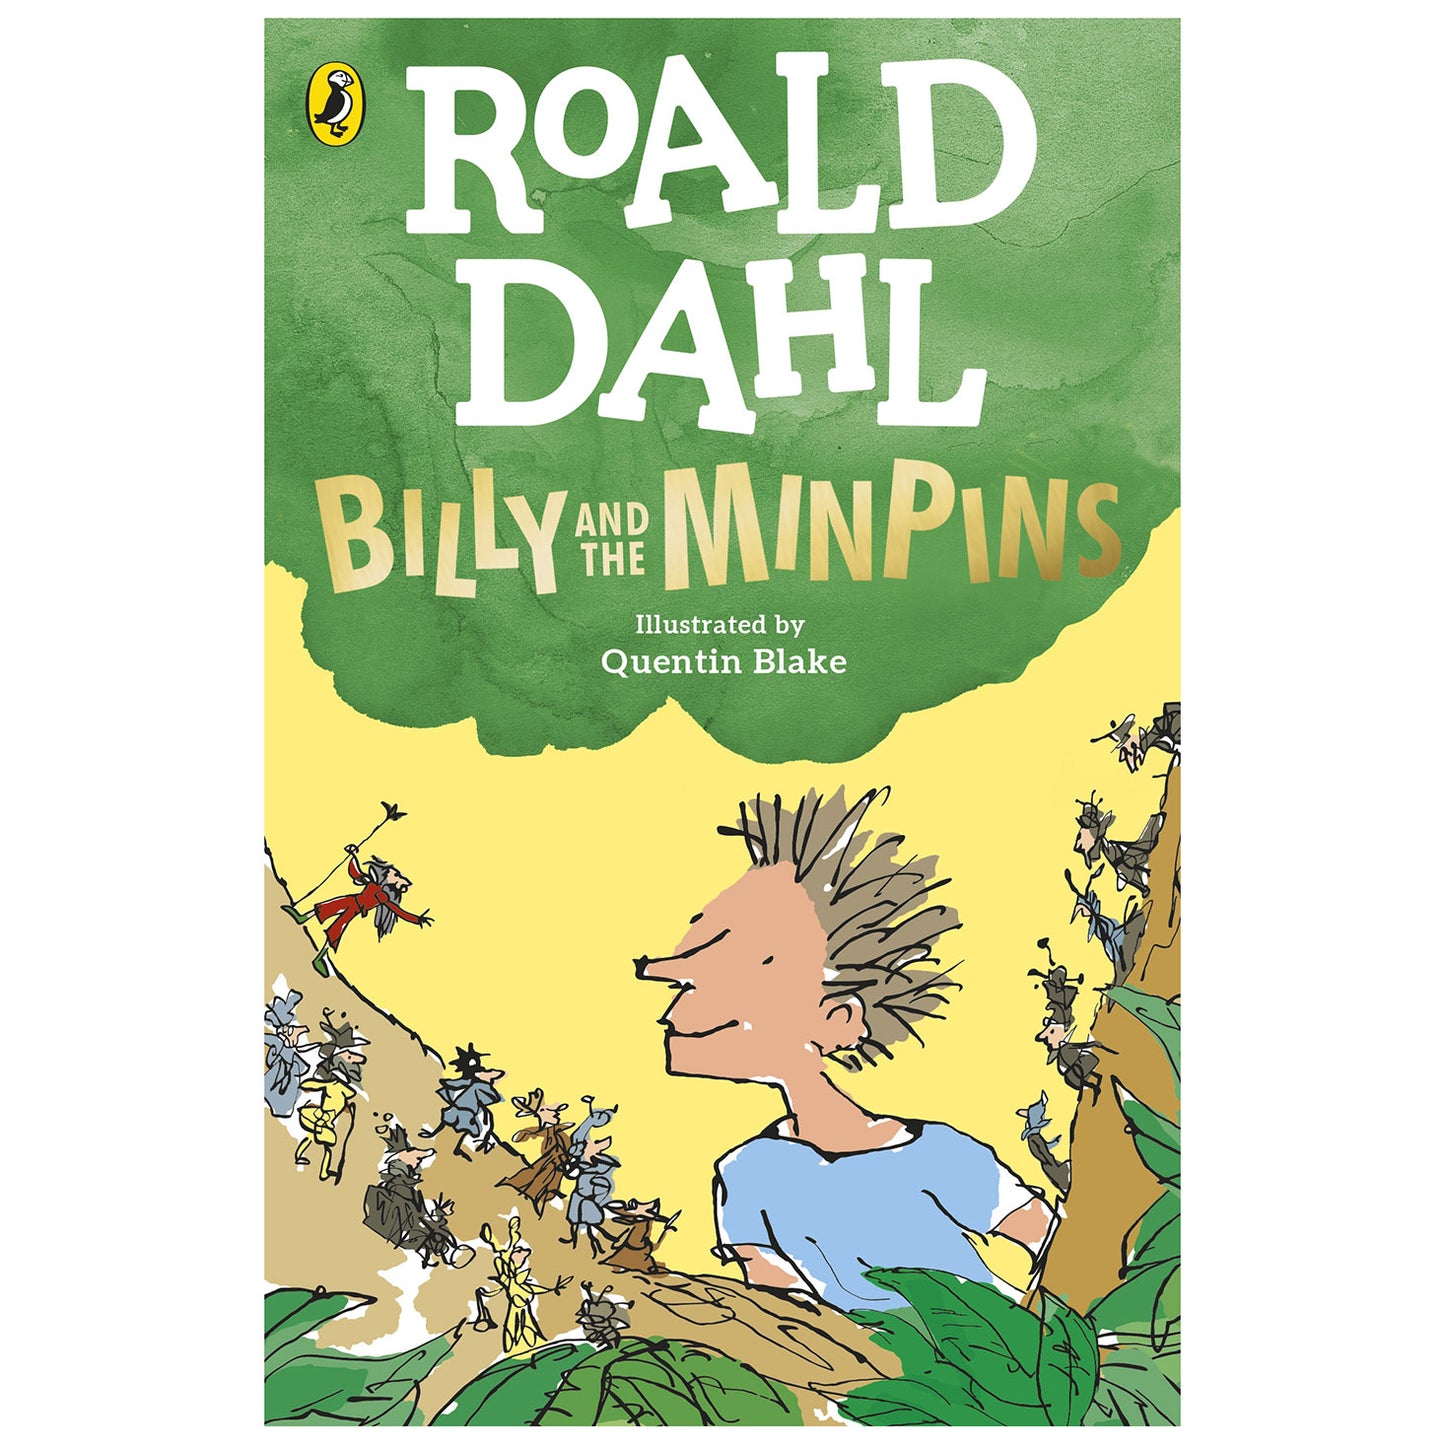 Billy and the Minpins by Roald Dahl and illustrated by Quentin Blake